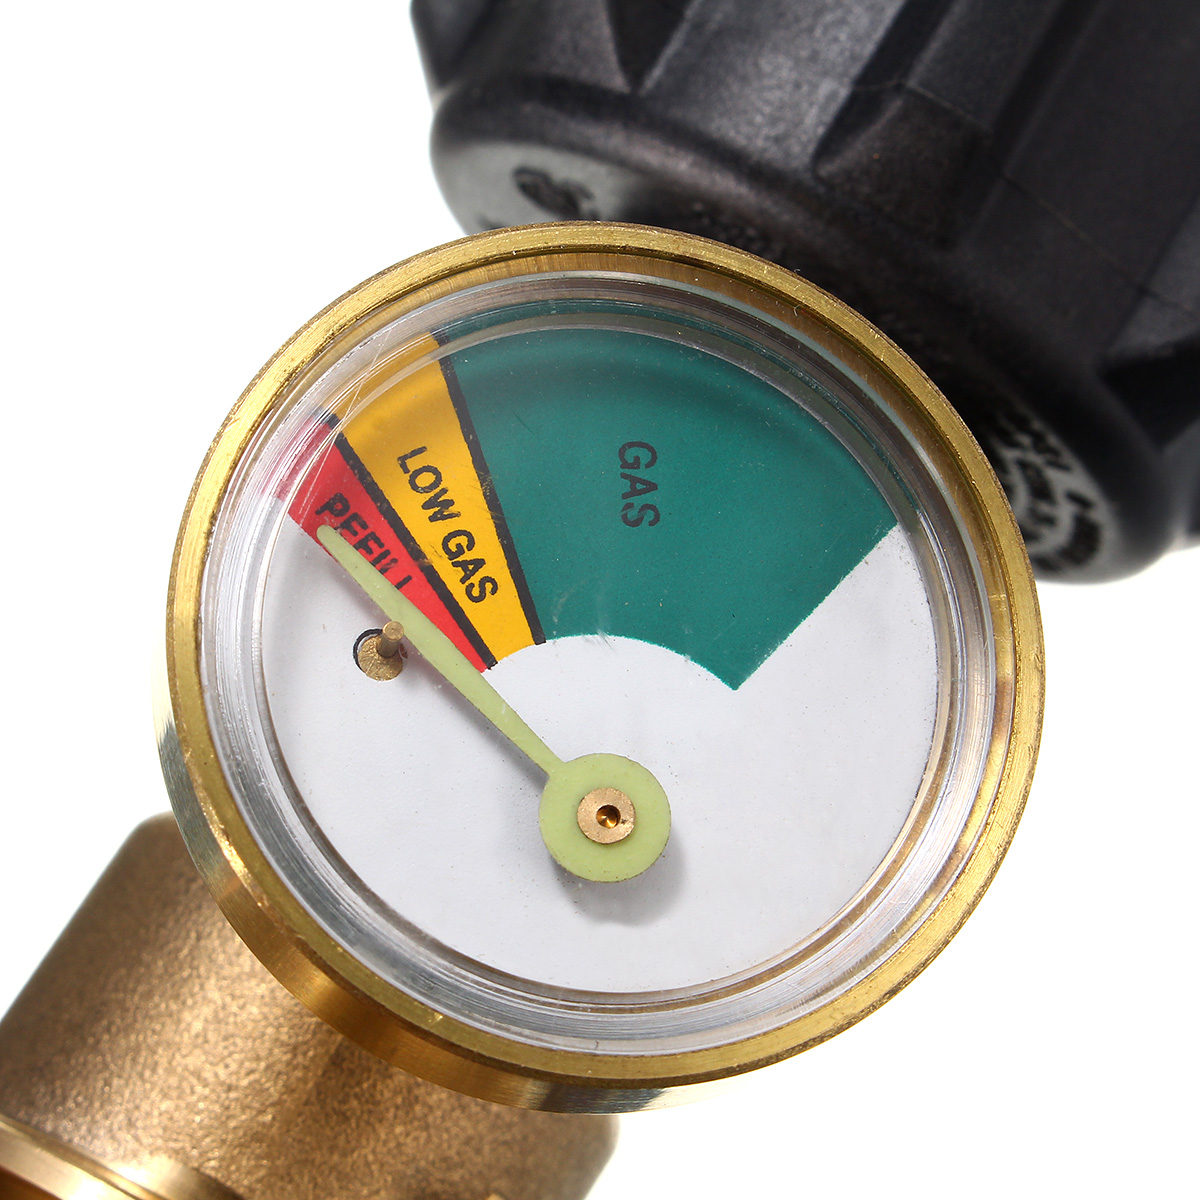 Propane-Tank-Gauge-Gas-Grill-BBQ-RV-Camping-Pressure-Gauge-With-Meter-Indicator-Fuel-1298135